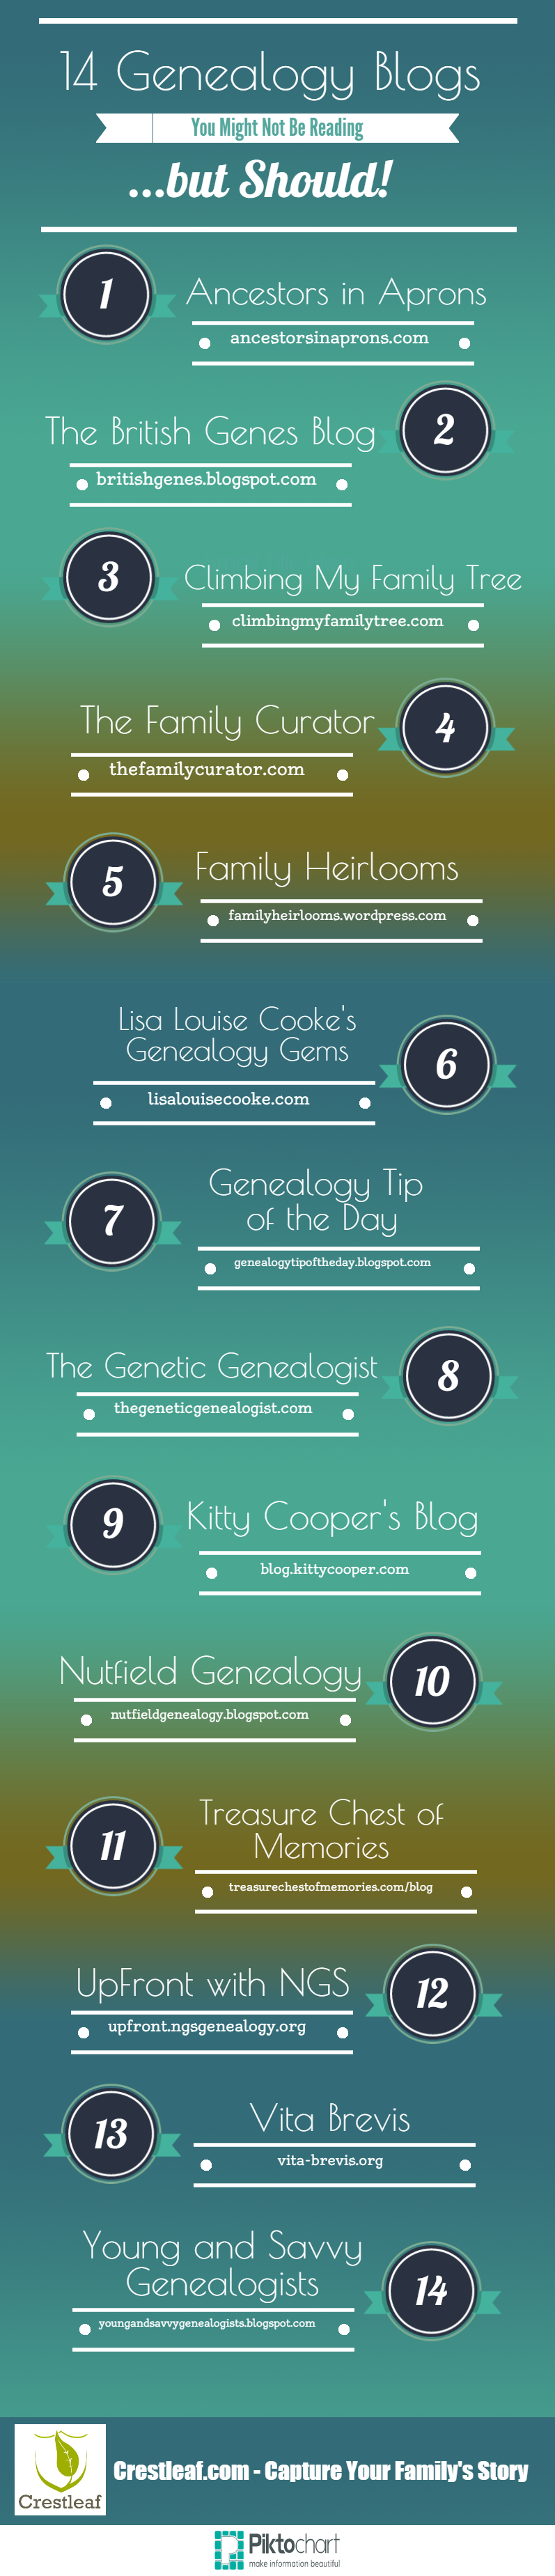 14-genealogy-blogs-you-might-not-be-reading-but-should-infographic-2